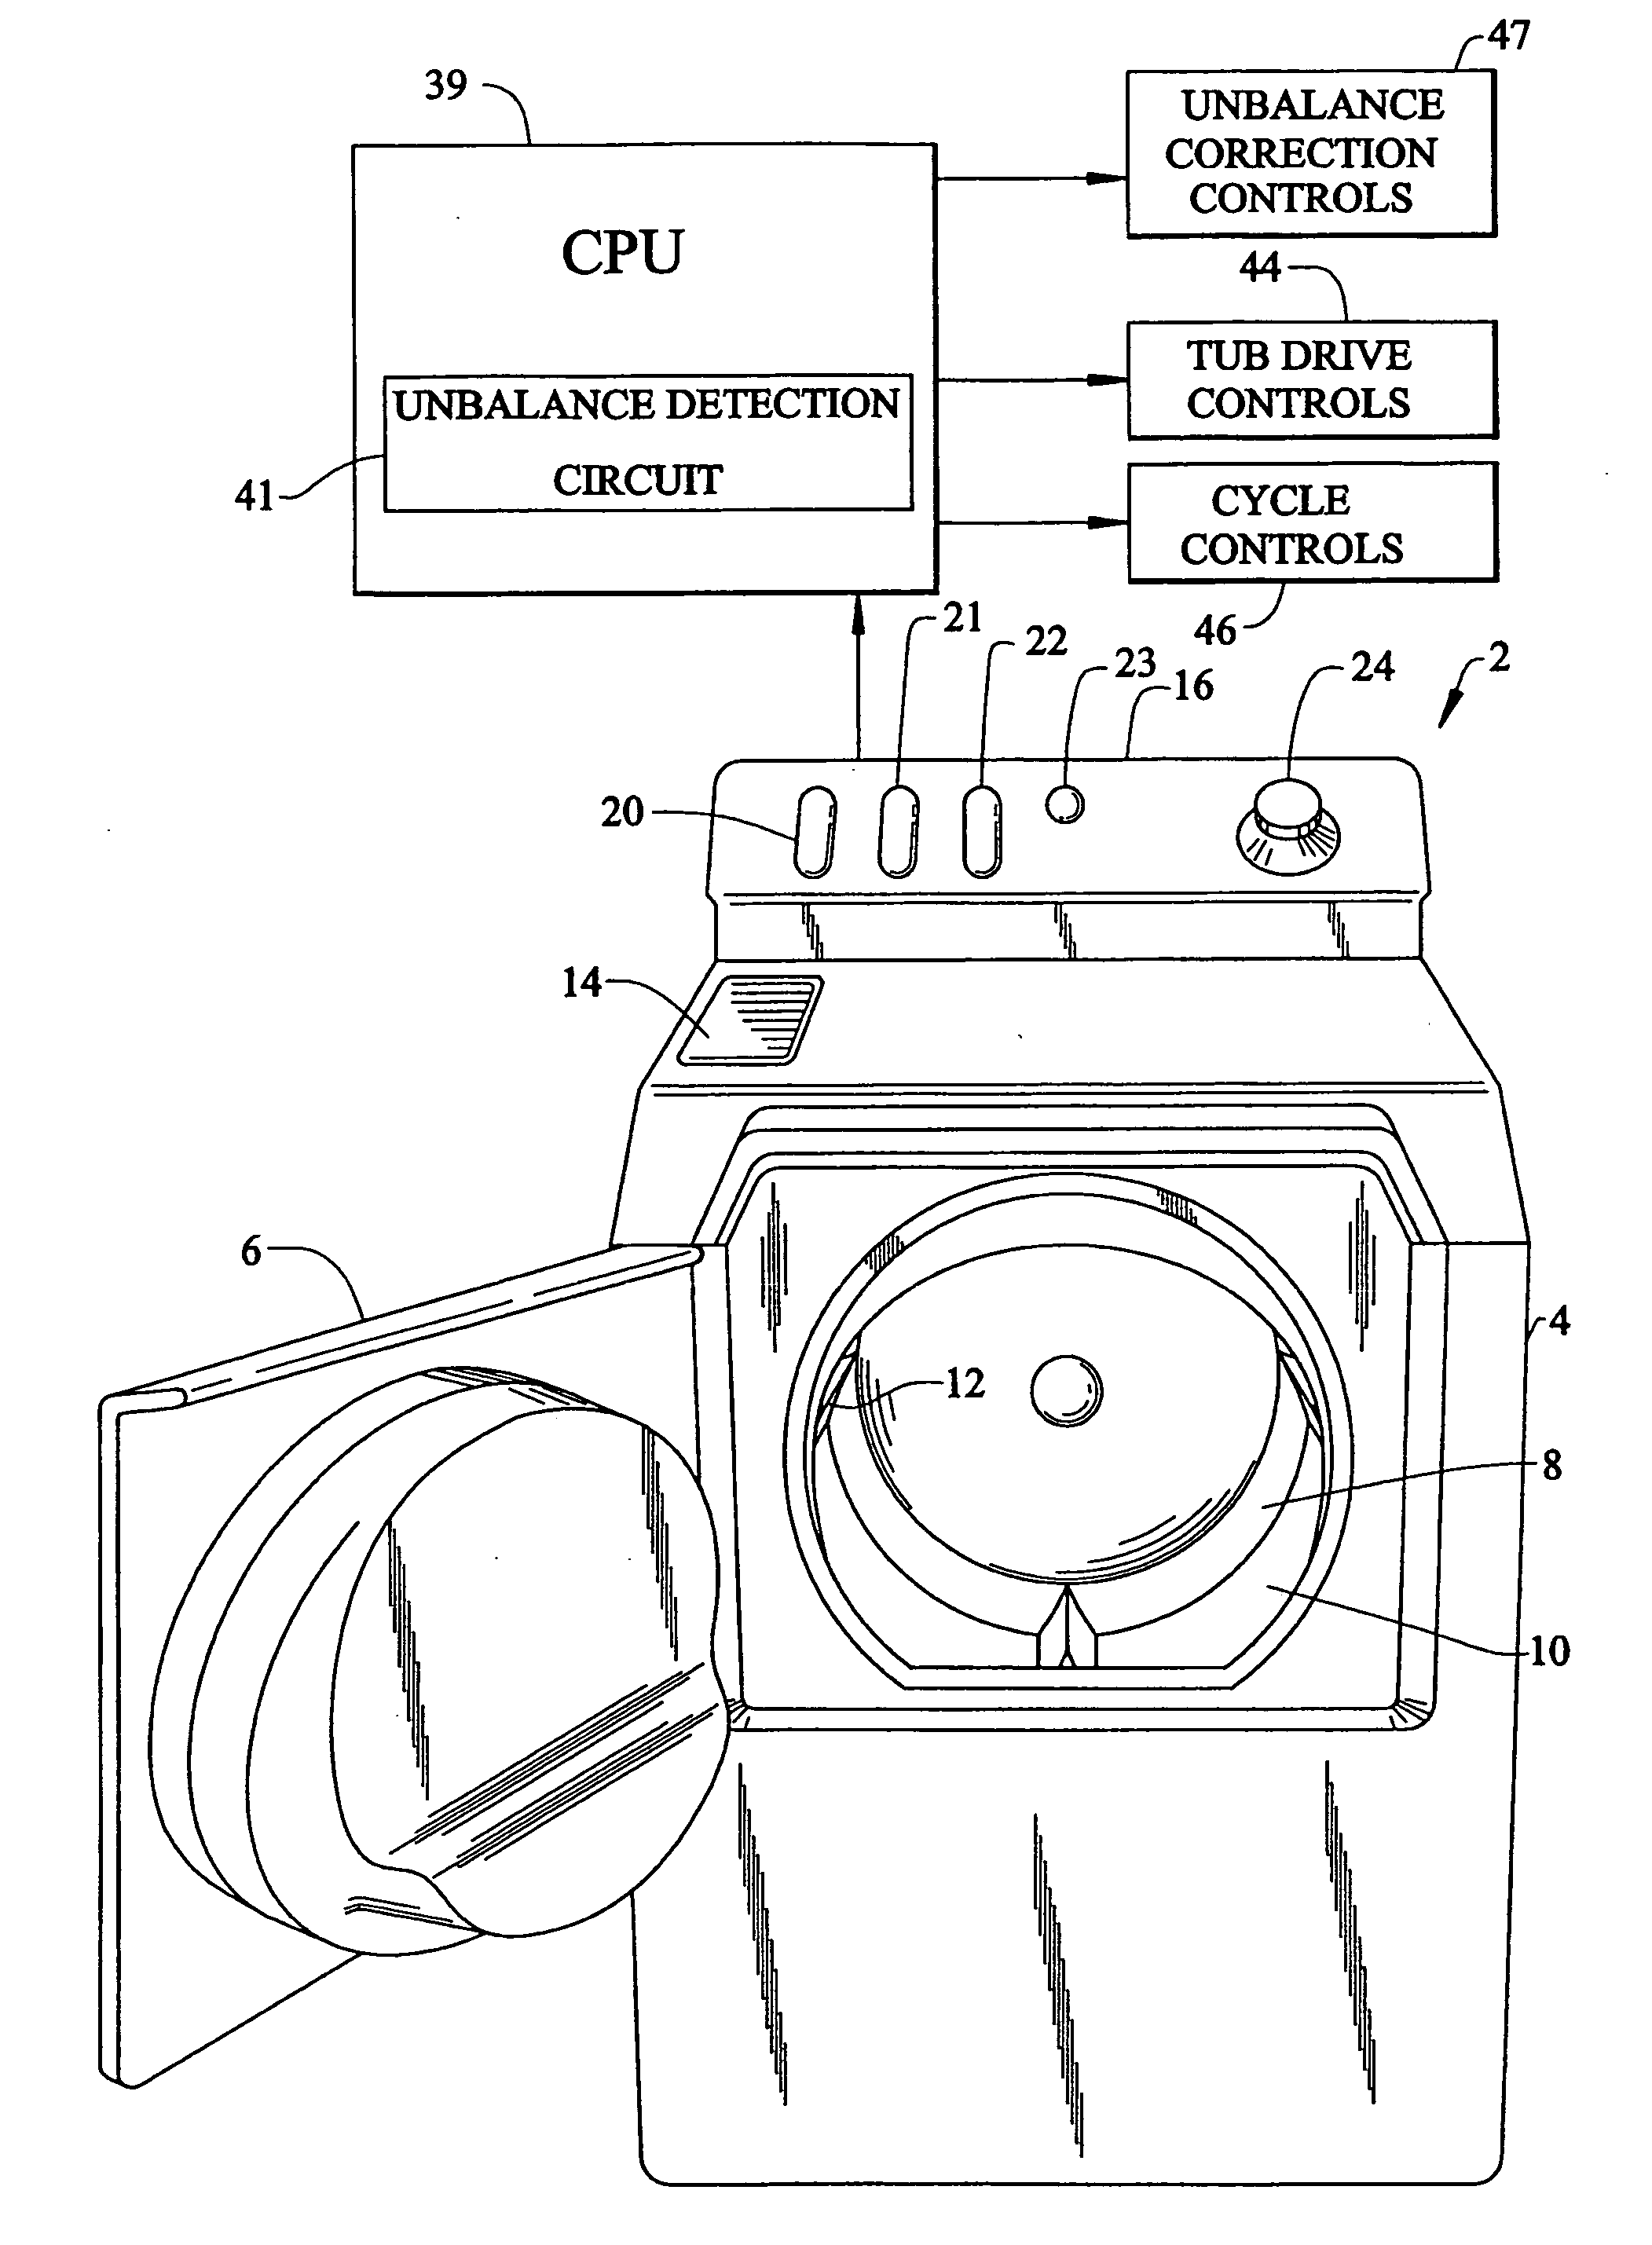 Solenoid plunger cushioning system for a washing machine balancing fluid valve